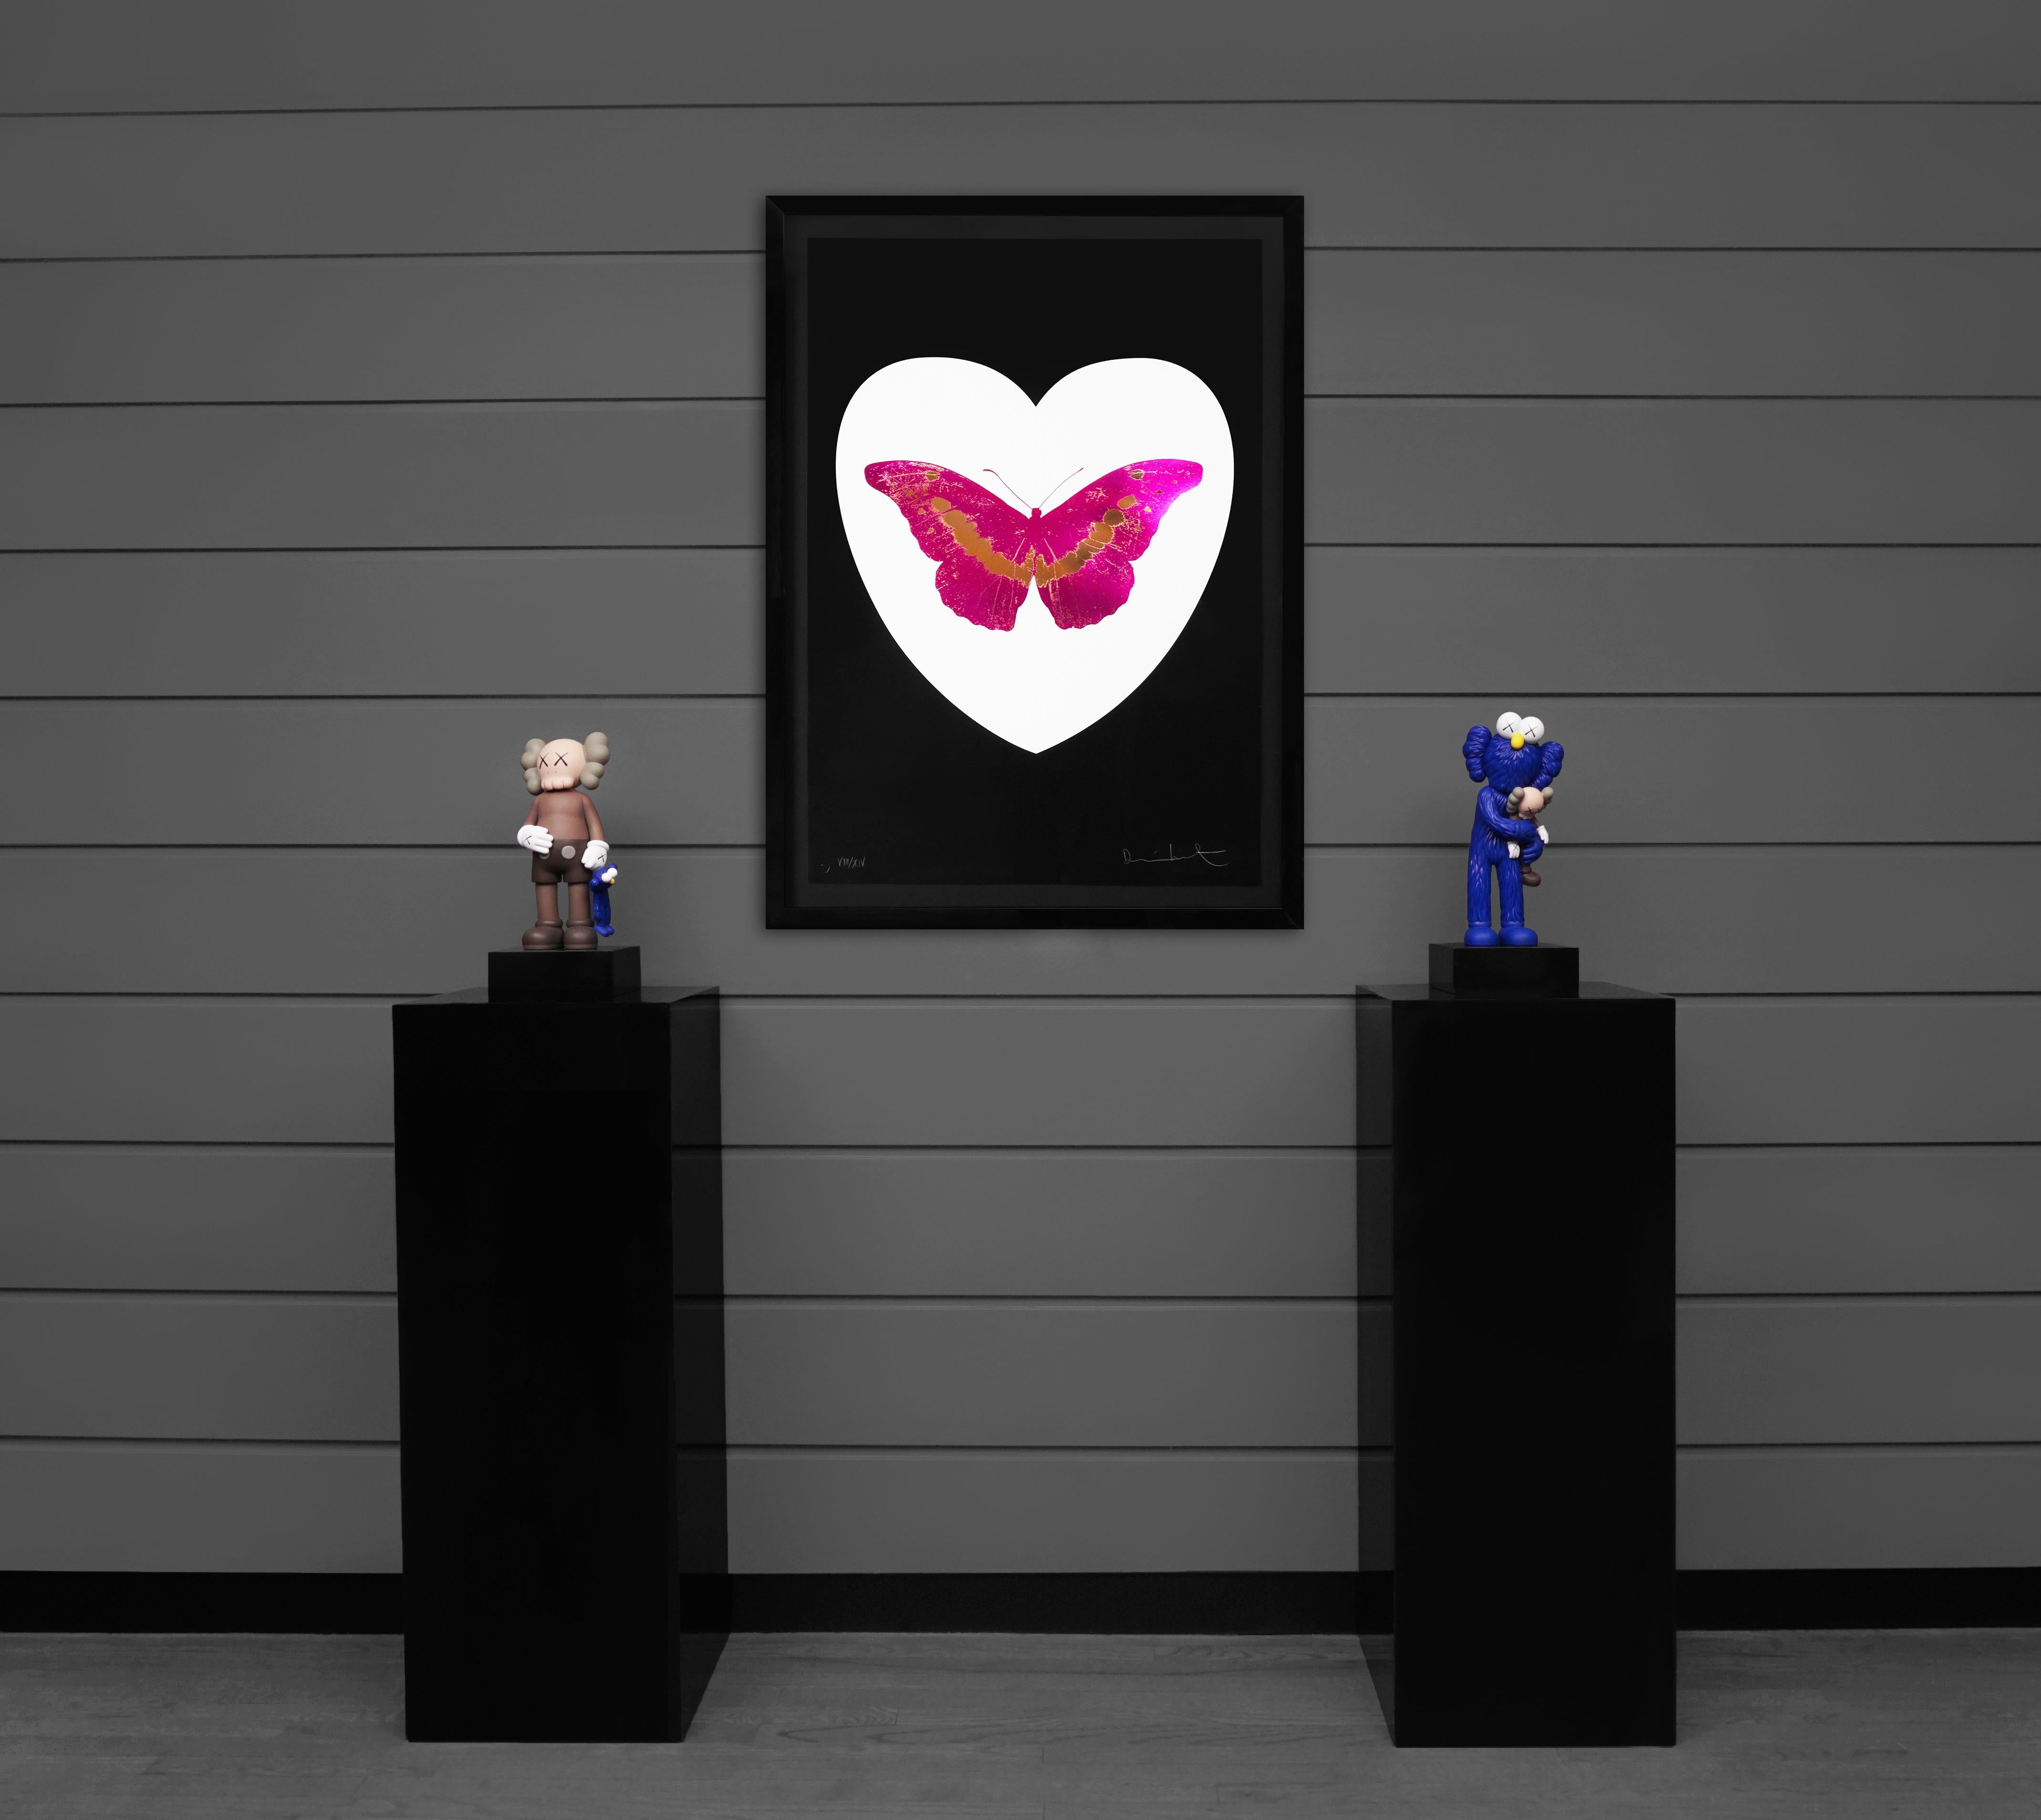 The luxurious 'I Love You' fuchsia and gold foil block butterfly was created in 2015, one of fourteen in the limited edition release of iconic silkscreen prints in honor of Valentine's Day. Damien Hirst’s trademark butterfly motif is intended to